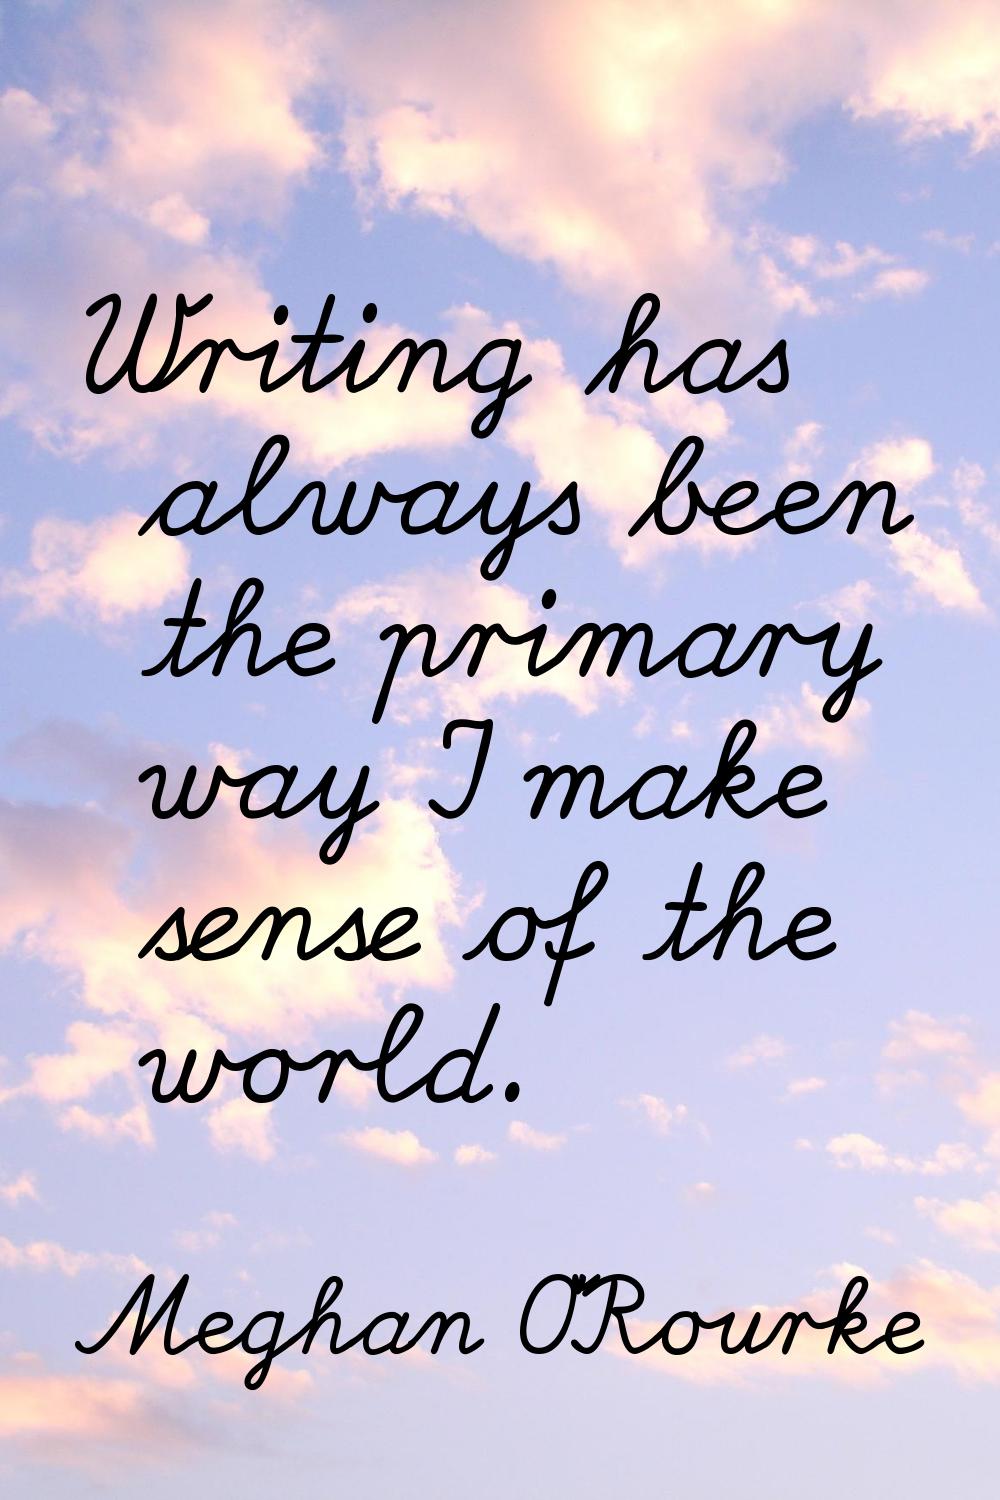 Writing has always been the primary way I make sense of the world.